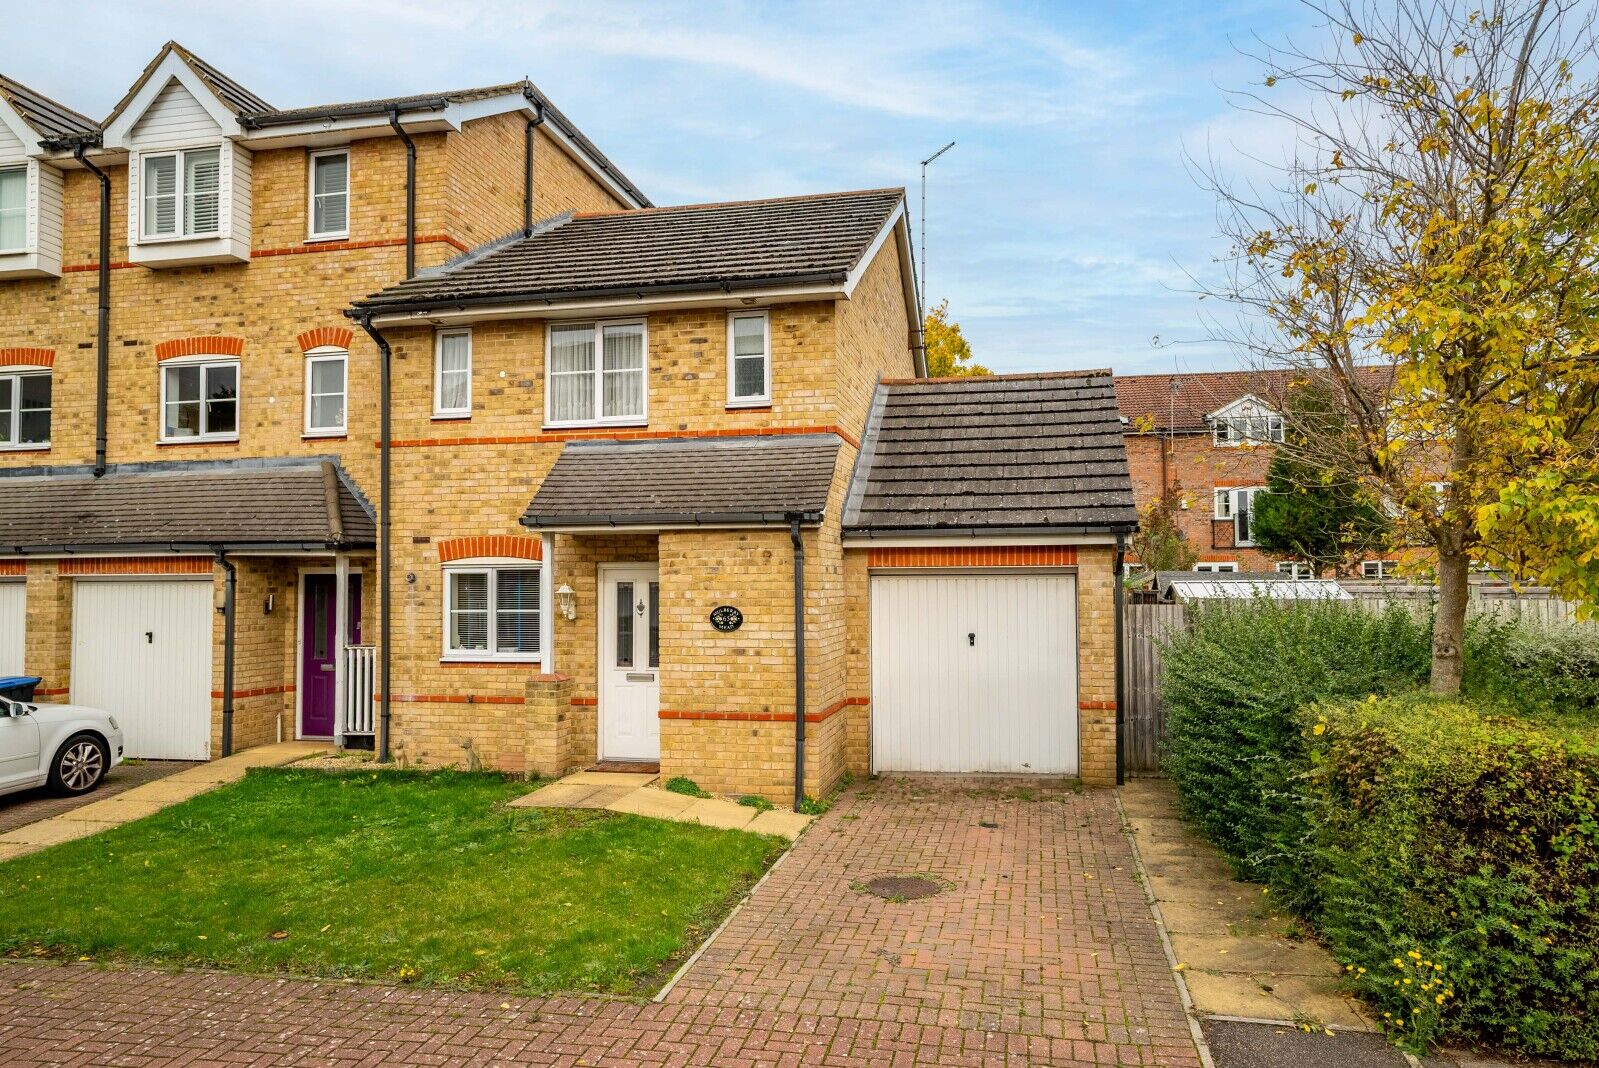 3 bedroom mid terraced house for sale Mulberry Mead, Hatfield, AL10, main image